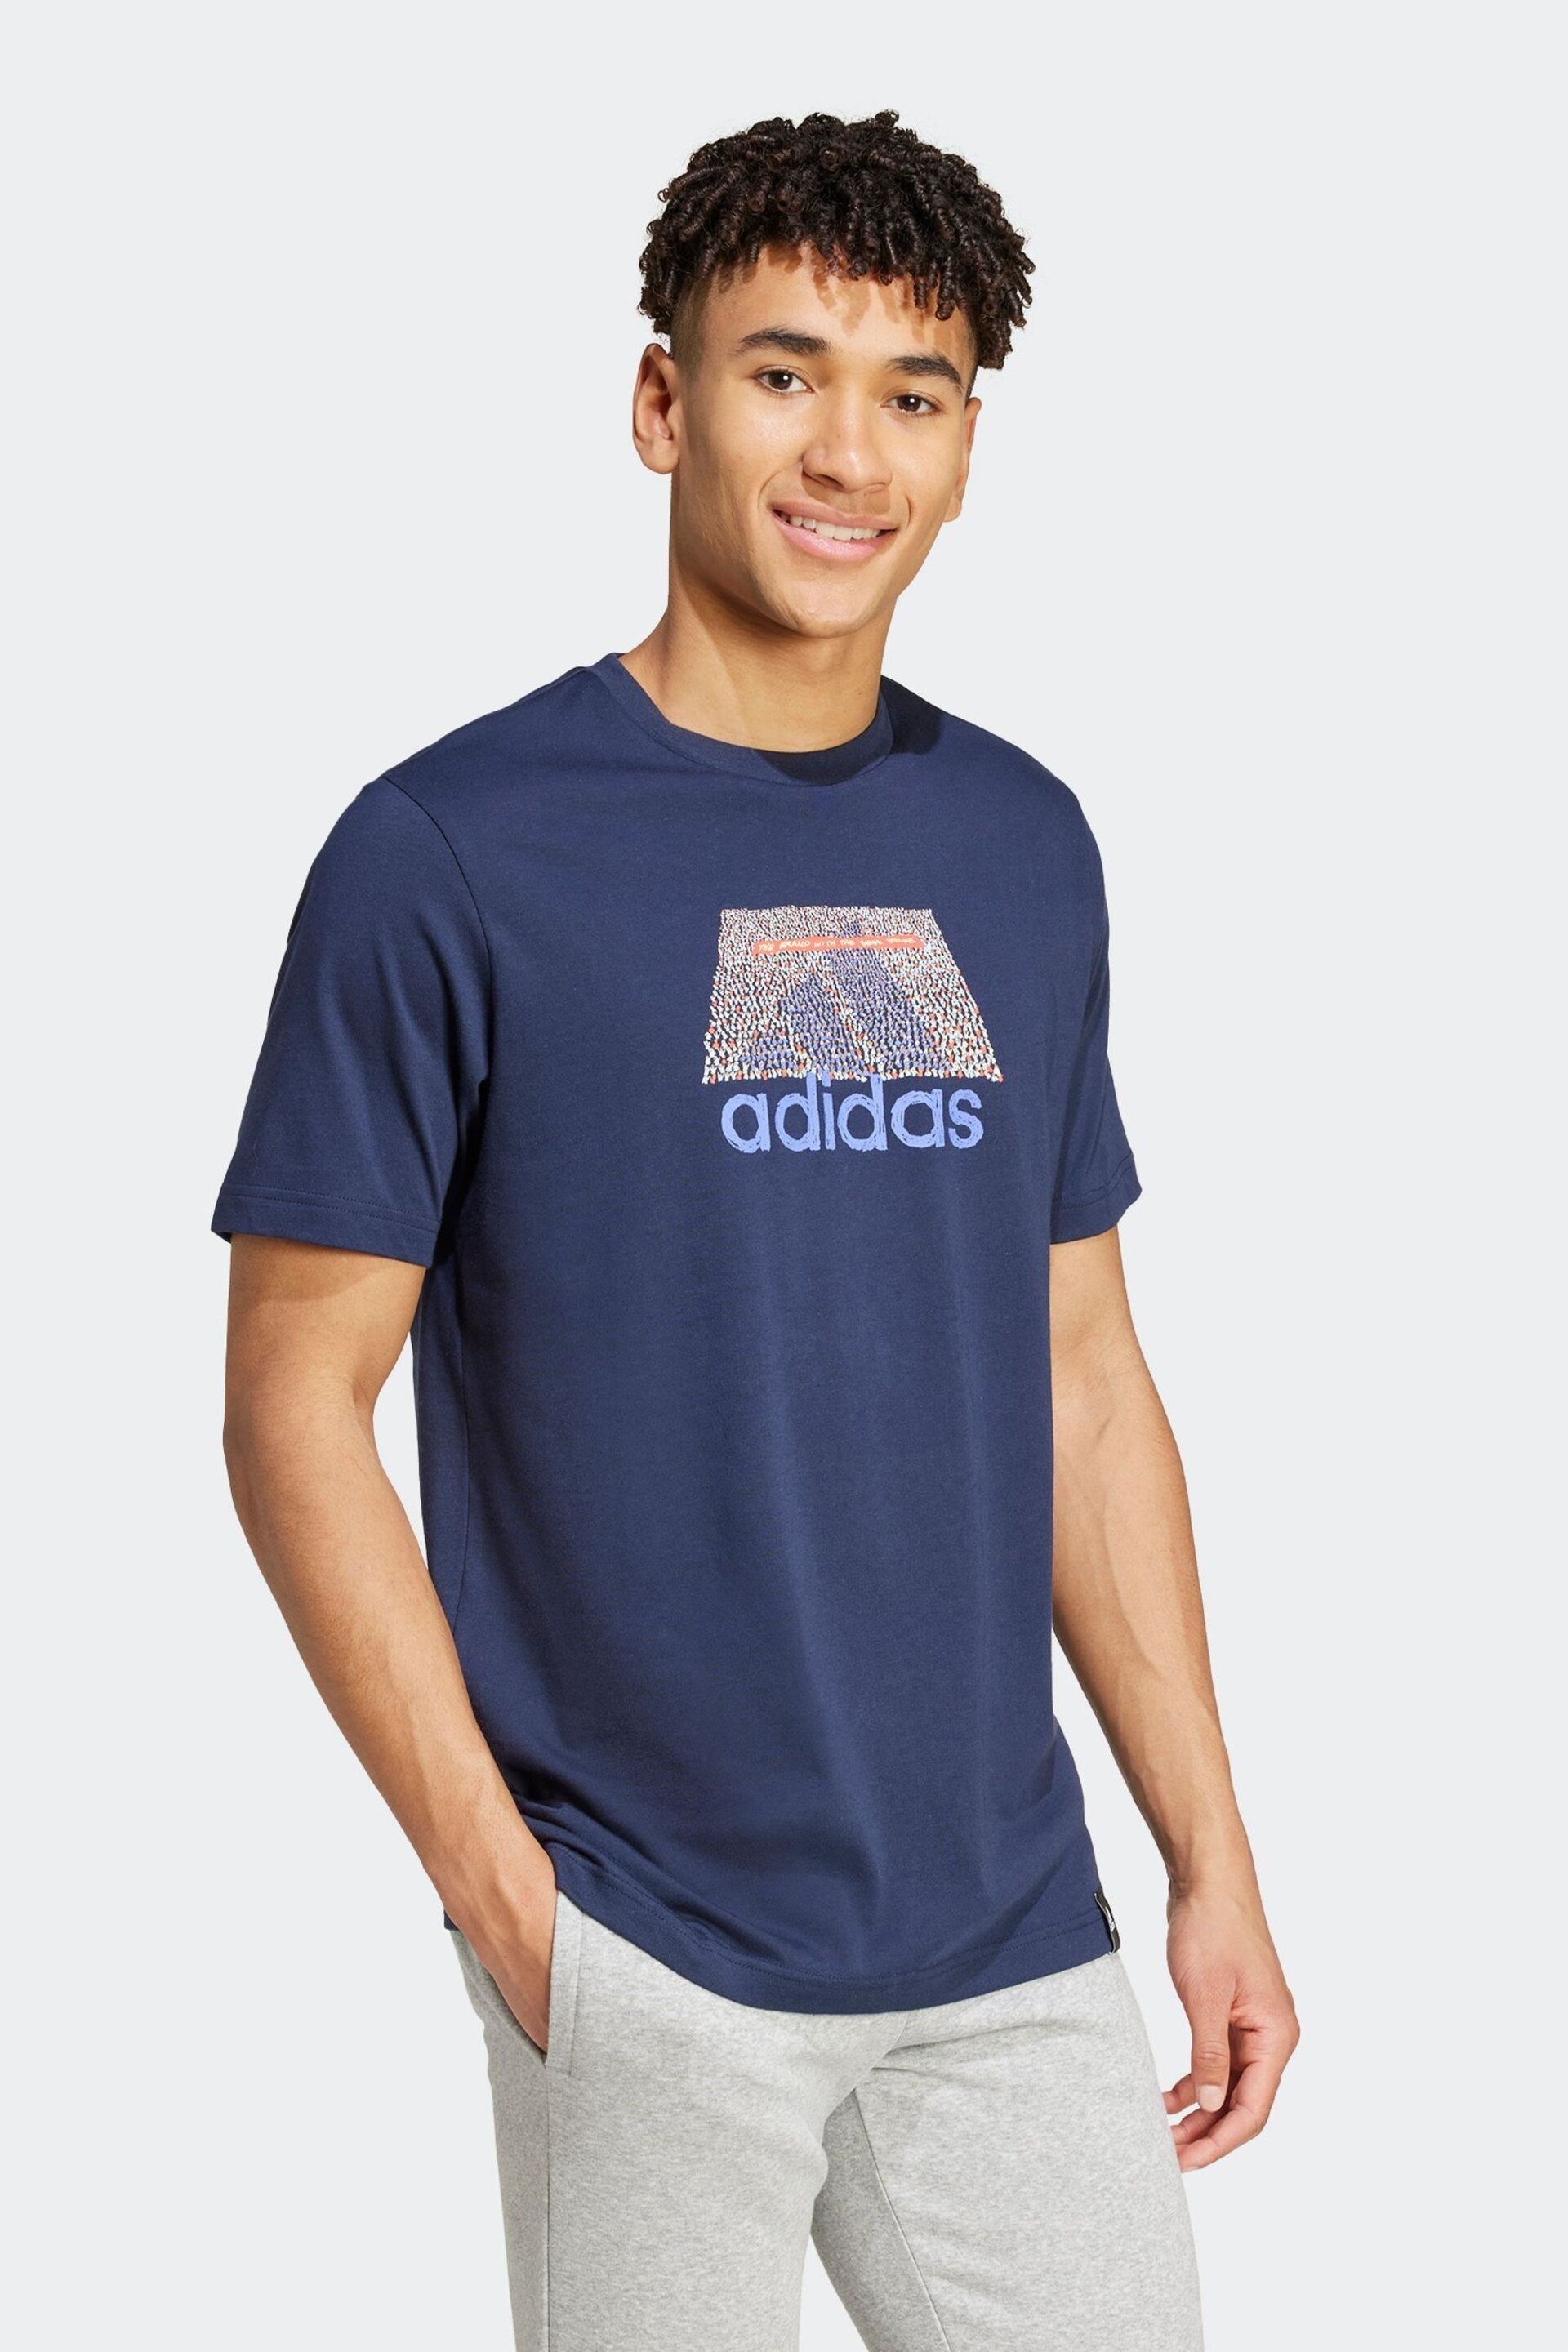 adidas Blue Codes Graphic T-Shirt - Image 1 of 7